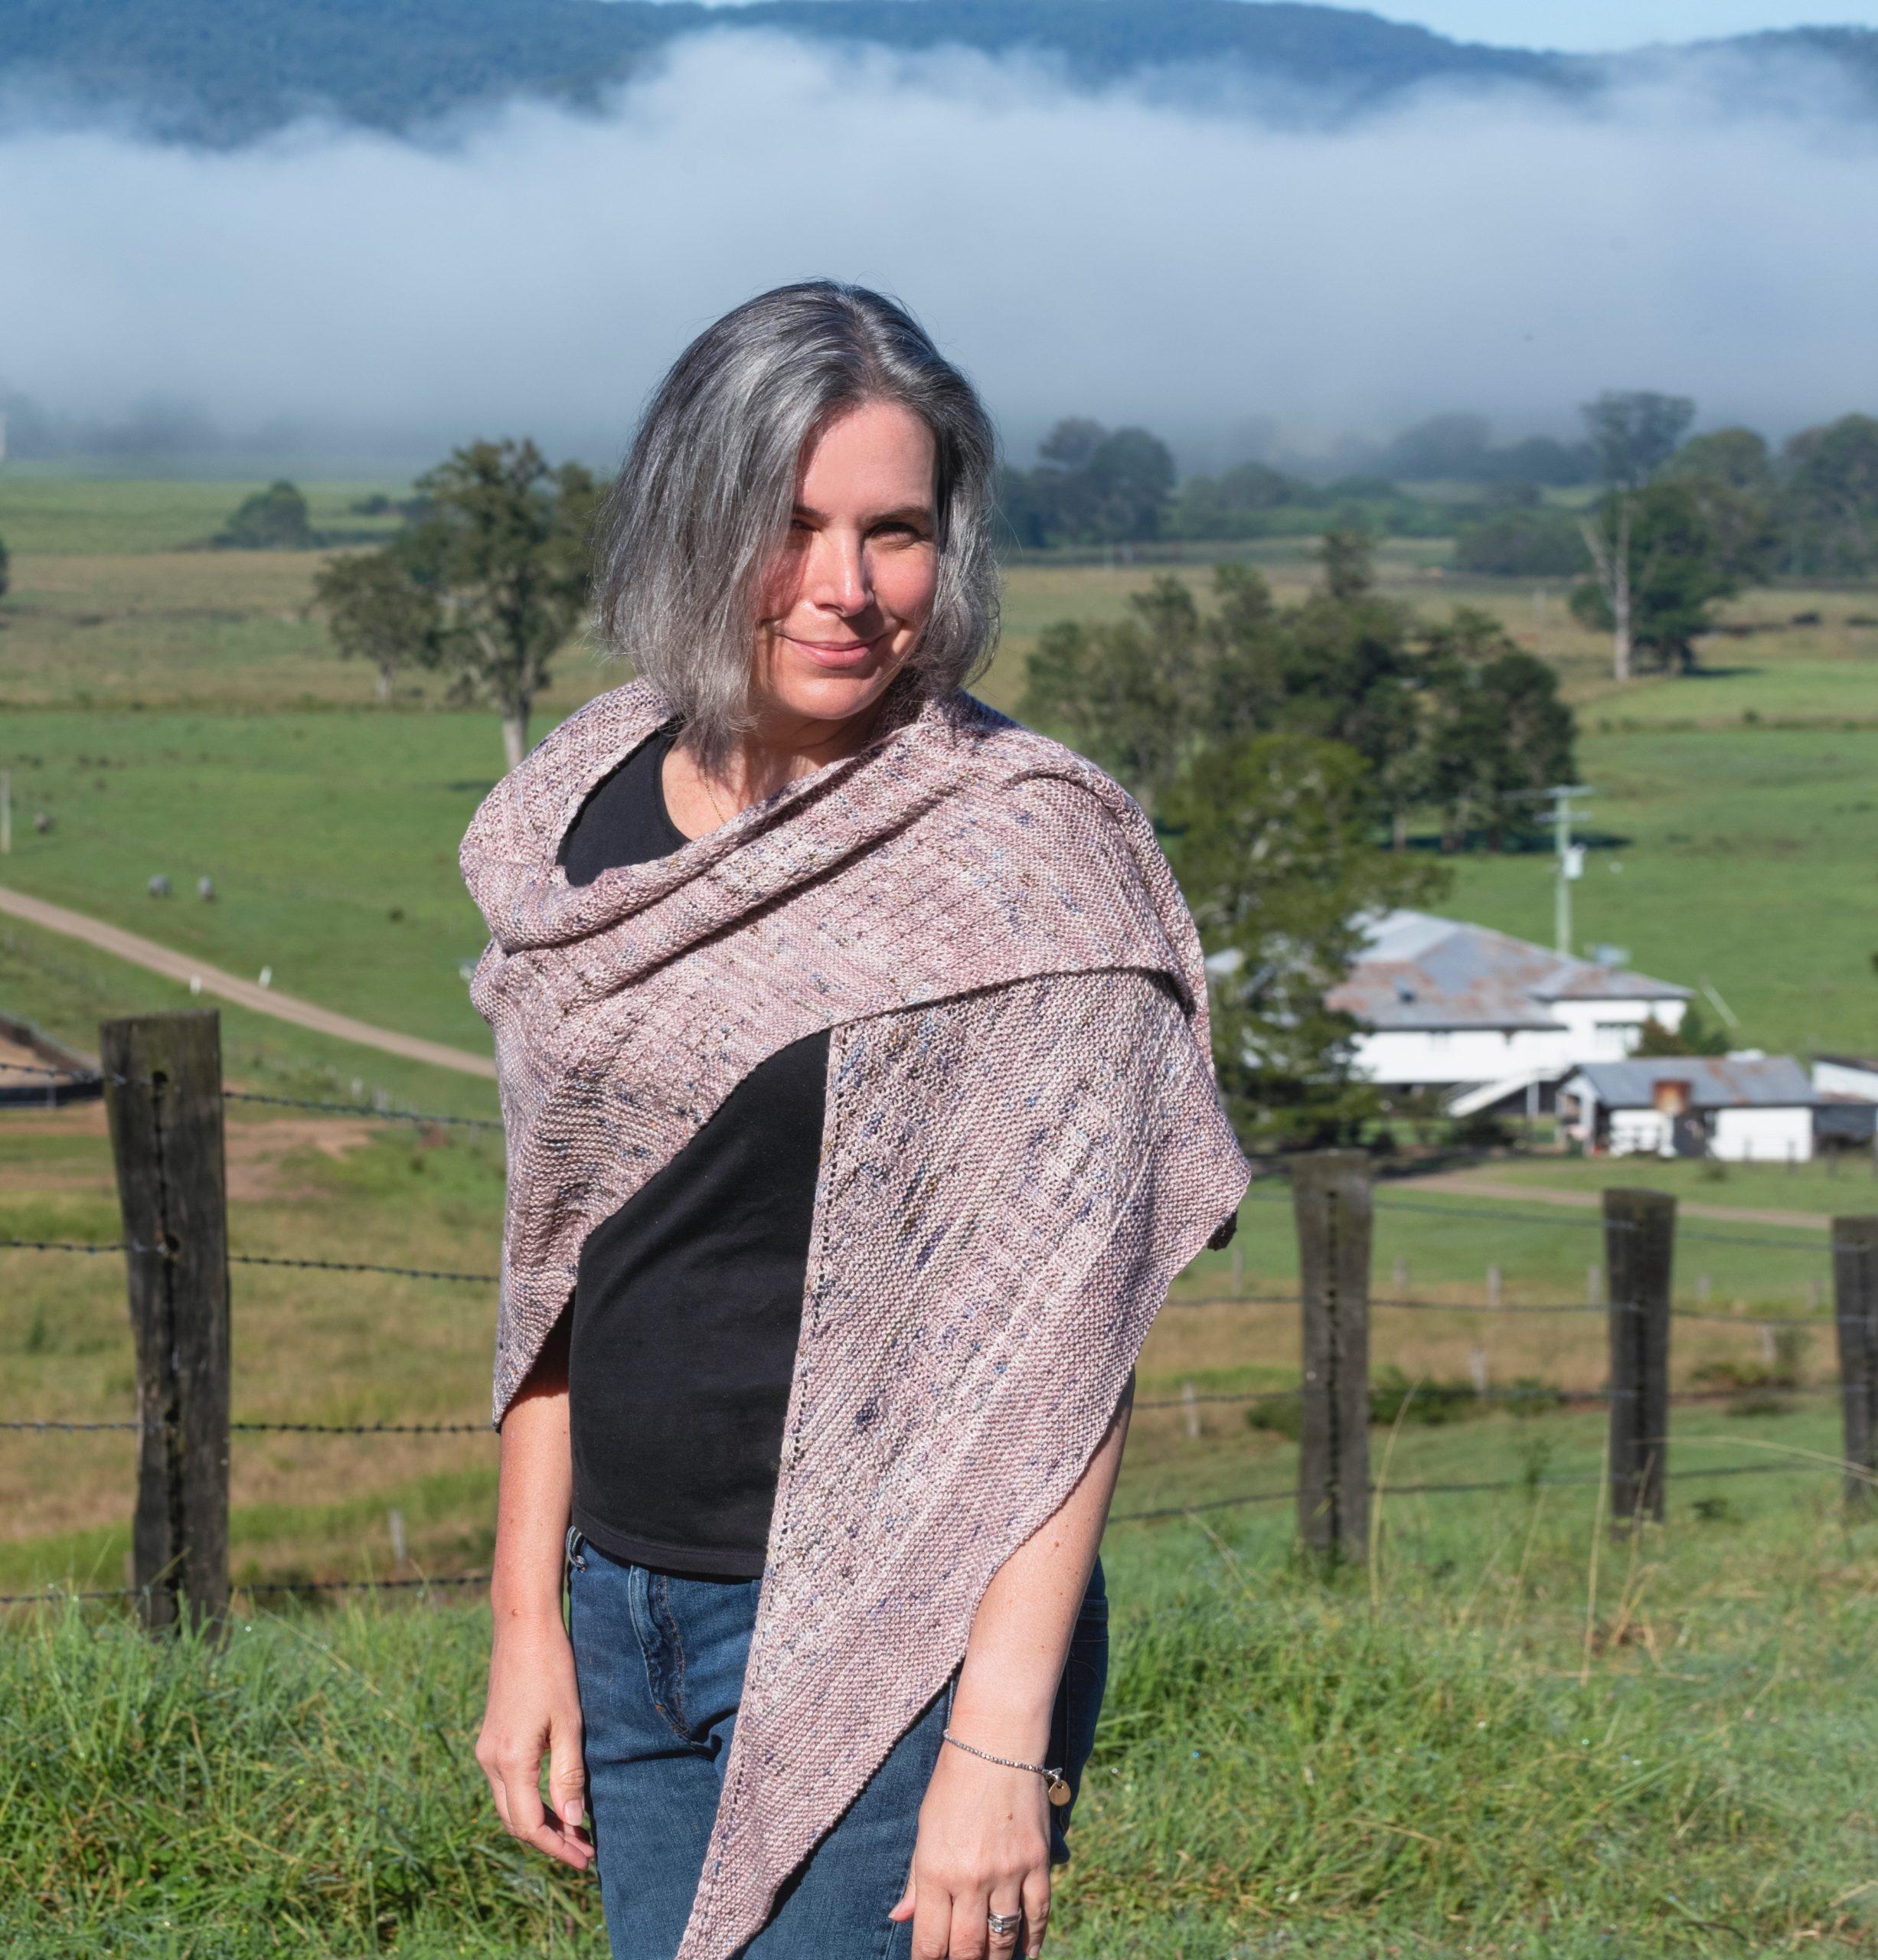 Helen Stewart, Curious Handmade wearing her own design, the Curling Mist shawl. There is green fields. and in the background, beyond the fields, a heavy curling mist rises into the hills